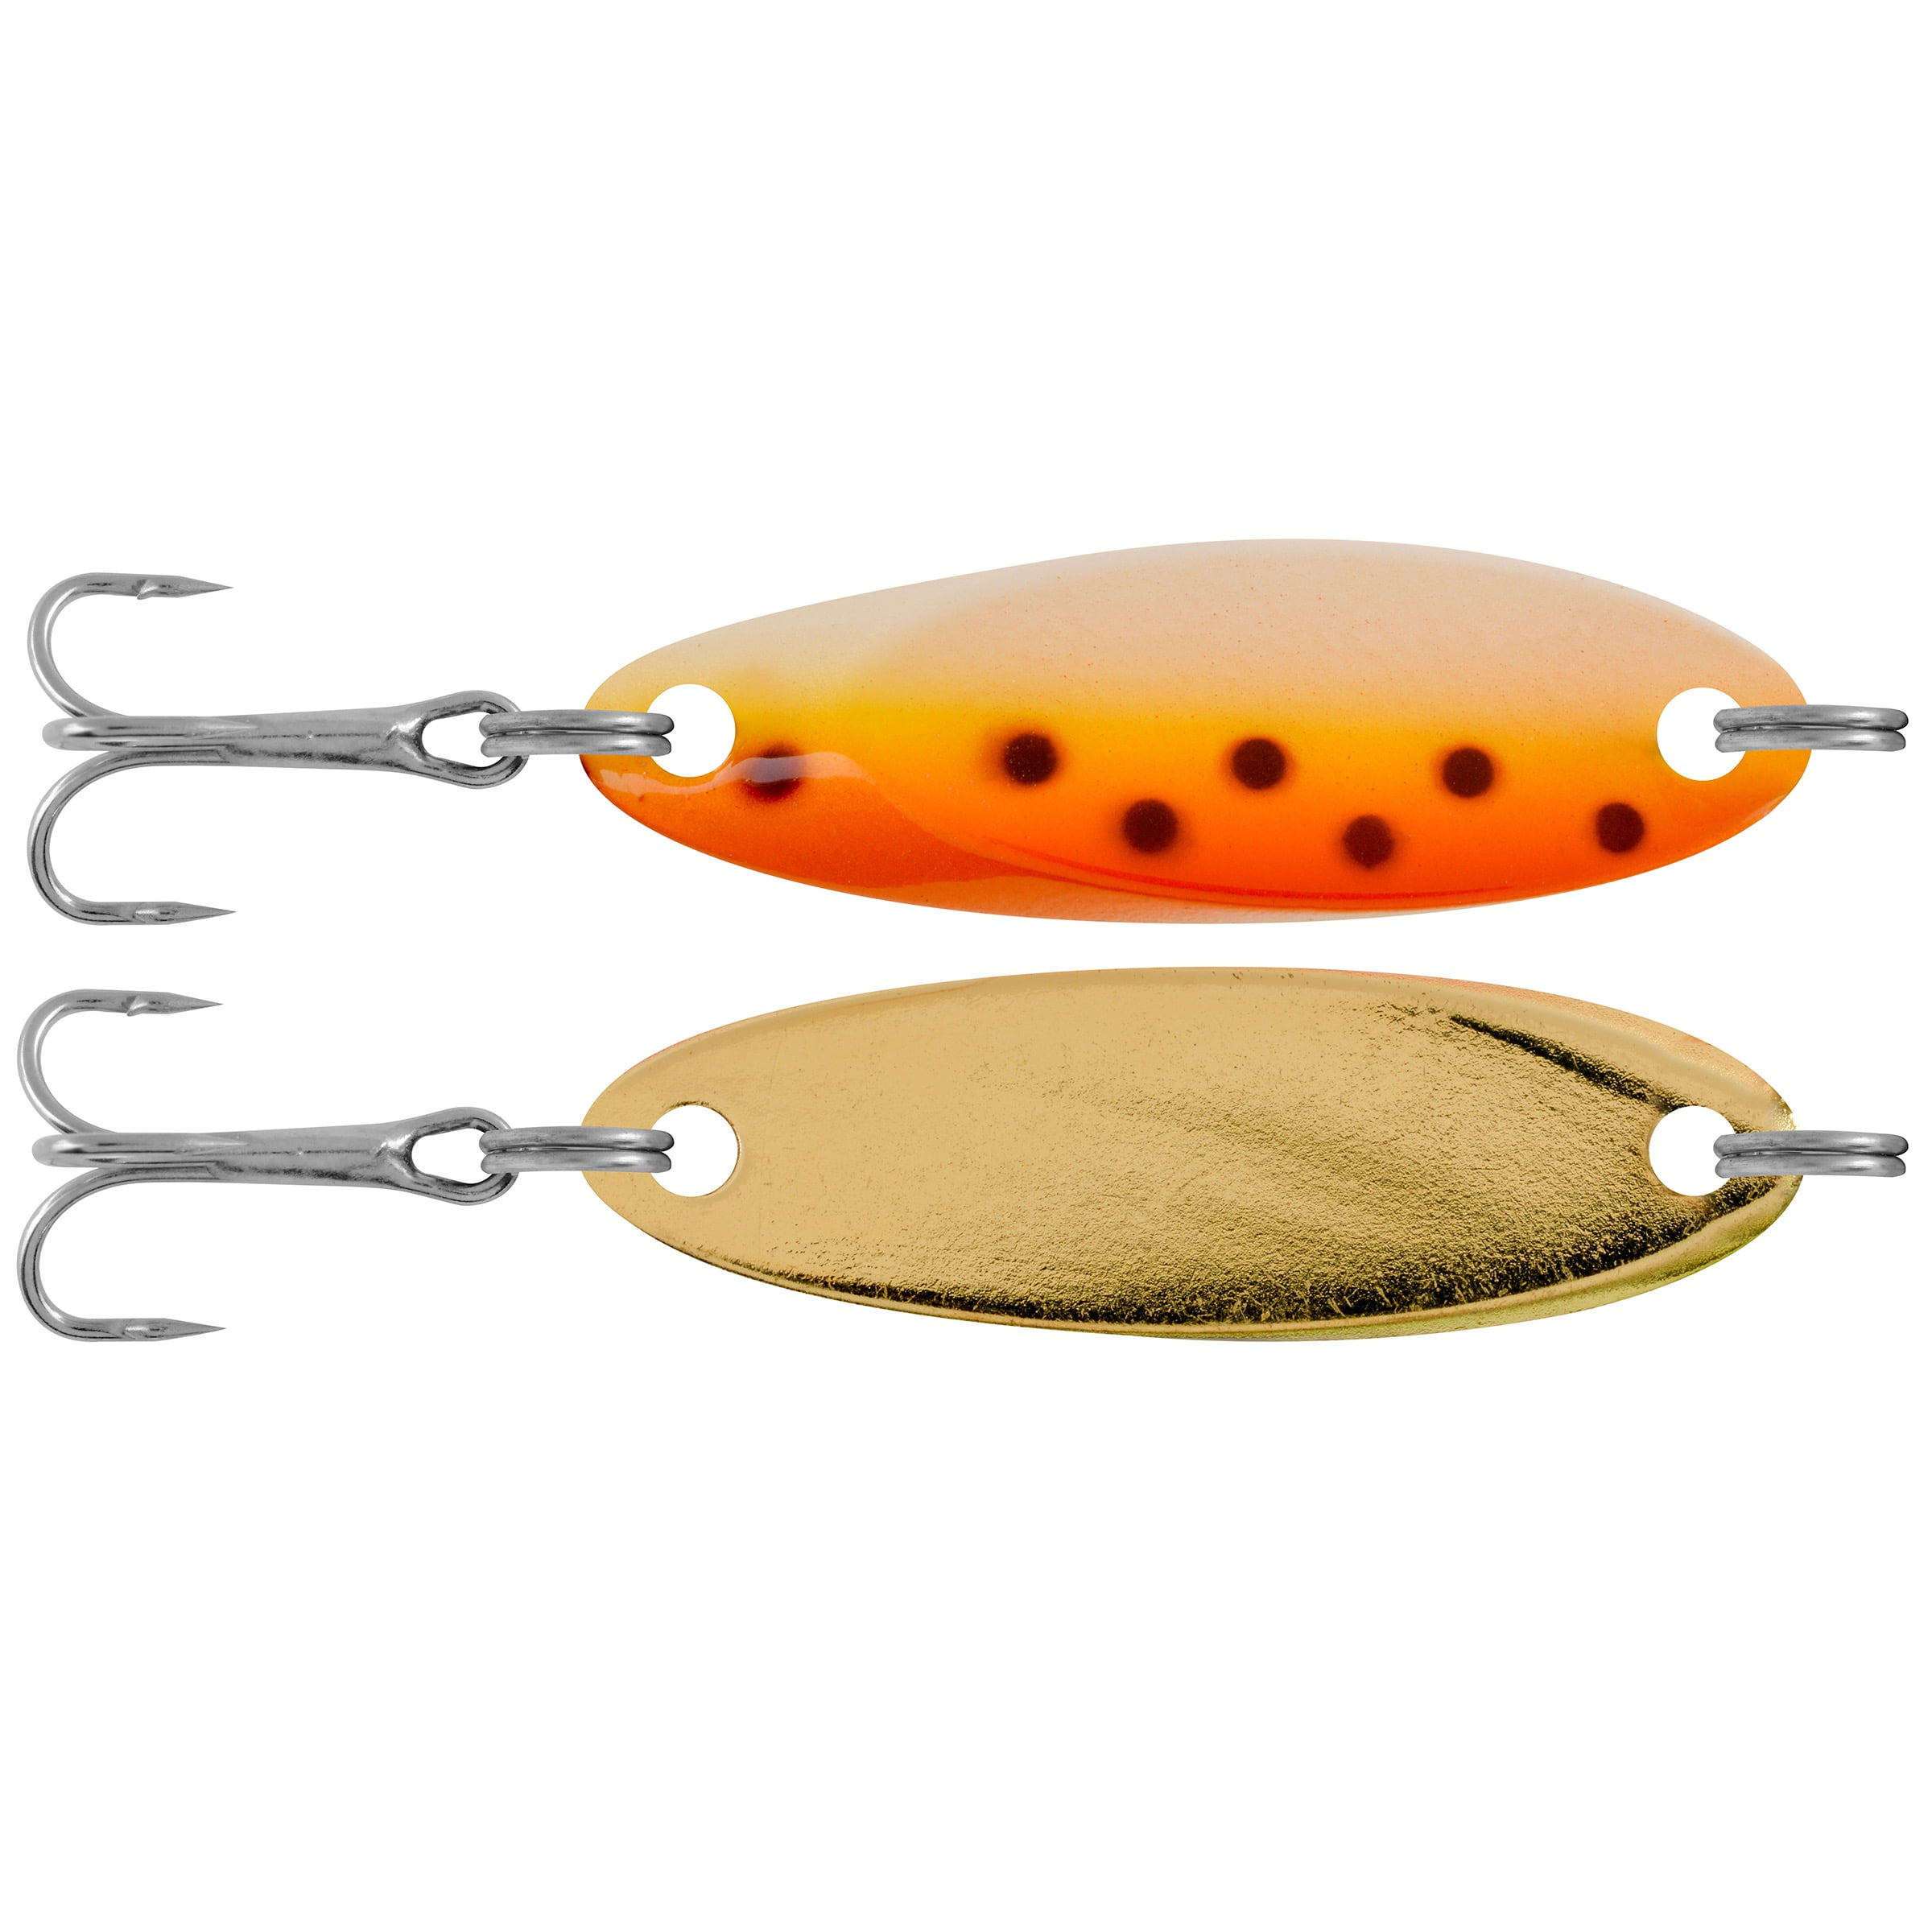 South Bend Kast-A-Way 1/4 oz. Brook Trout, Fishing Spoons